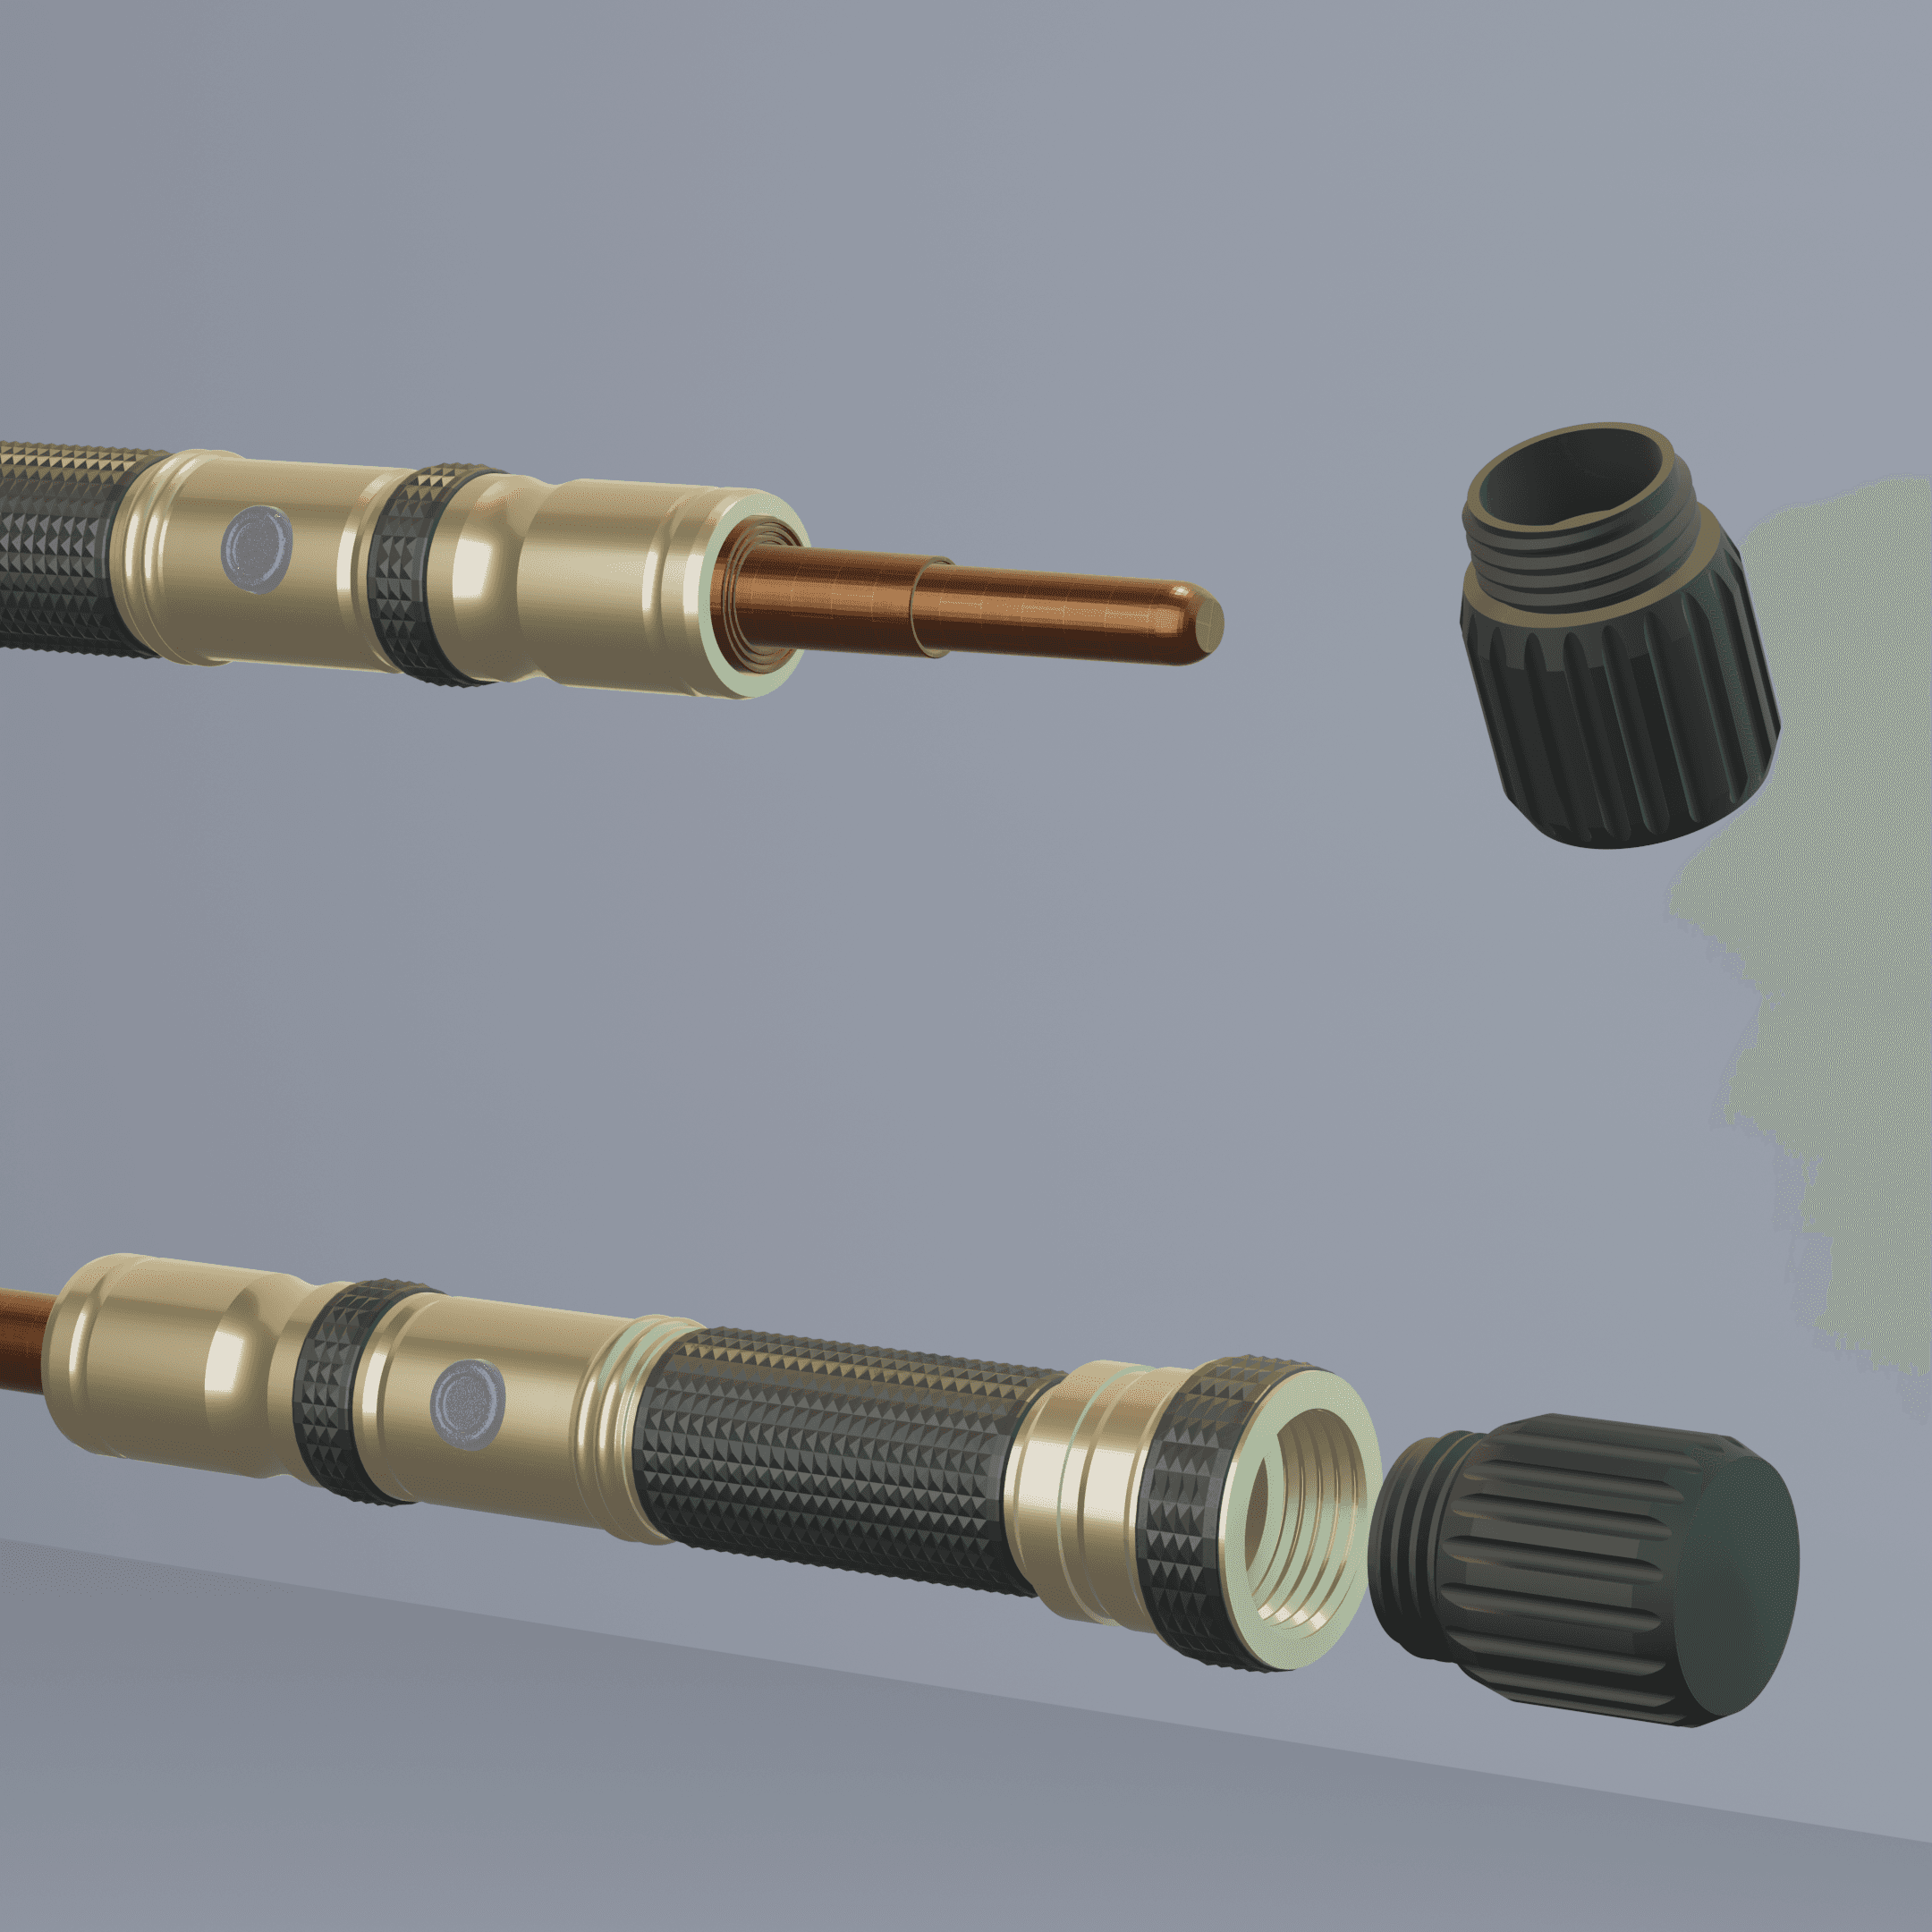 Print in Place Collapsing Jedi Lightsaber Concept 5 3d model